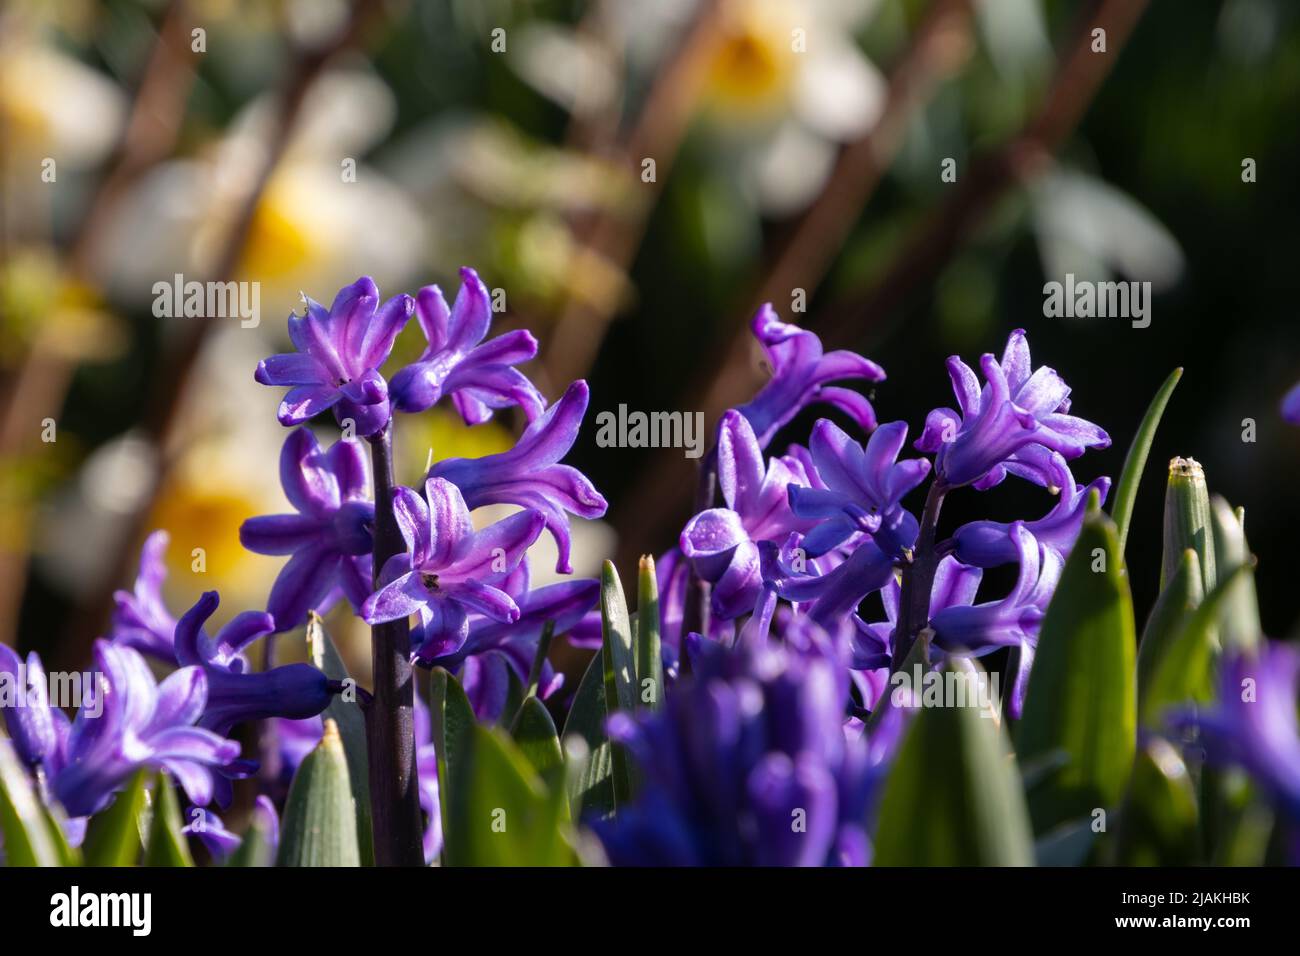 Purple blossoms of a hyacinth, also called Hyacinthus orientalis or Gartenhyazinthe Stock Photo